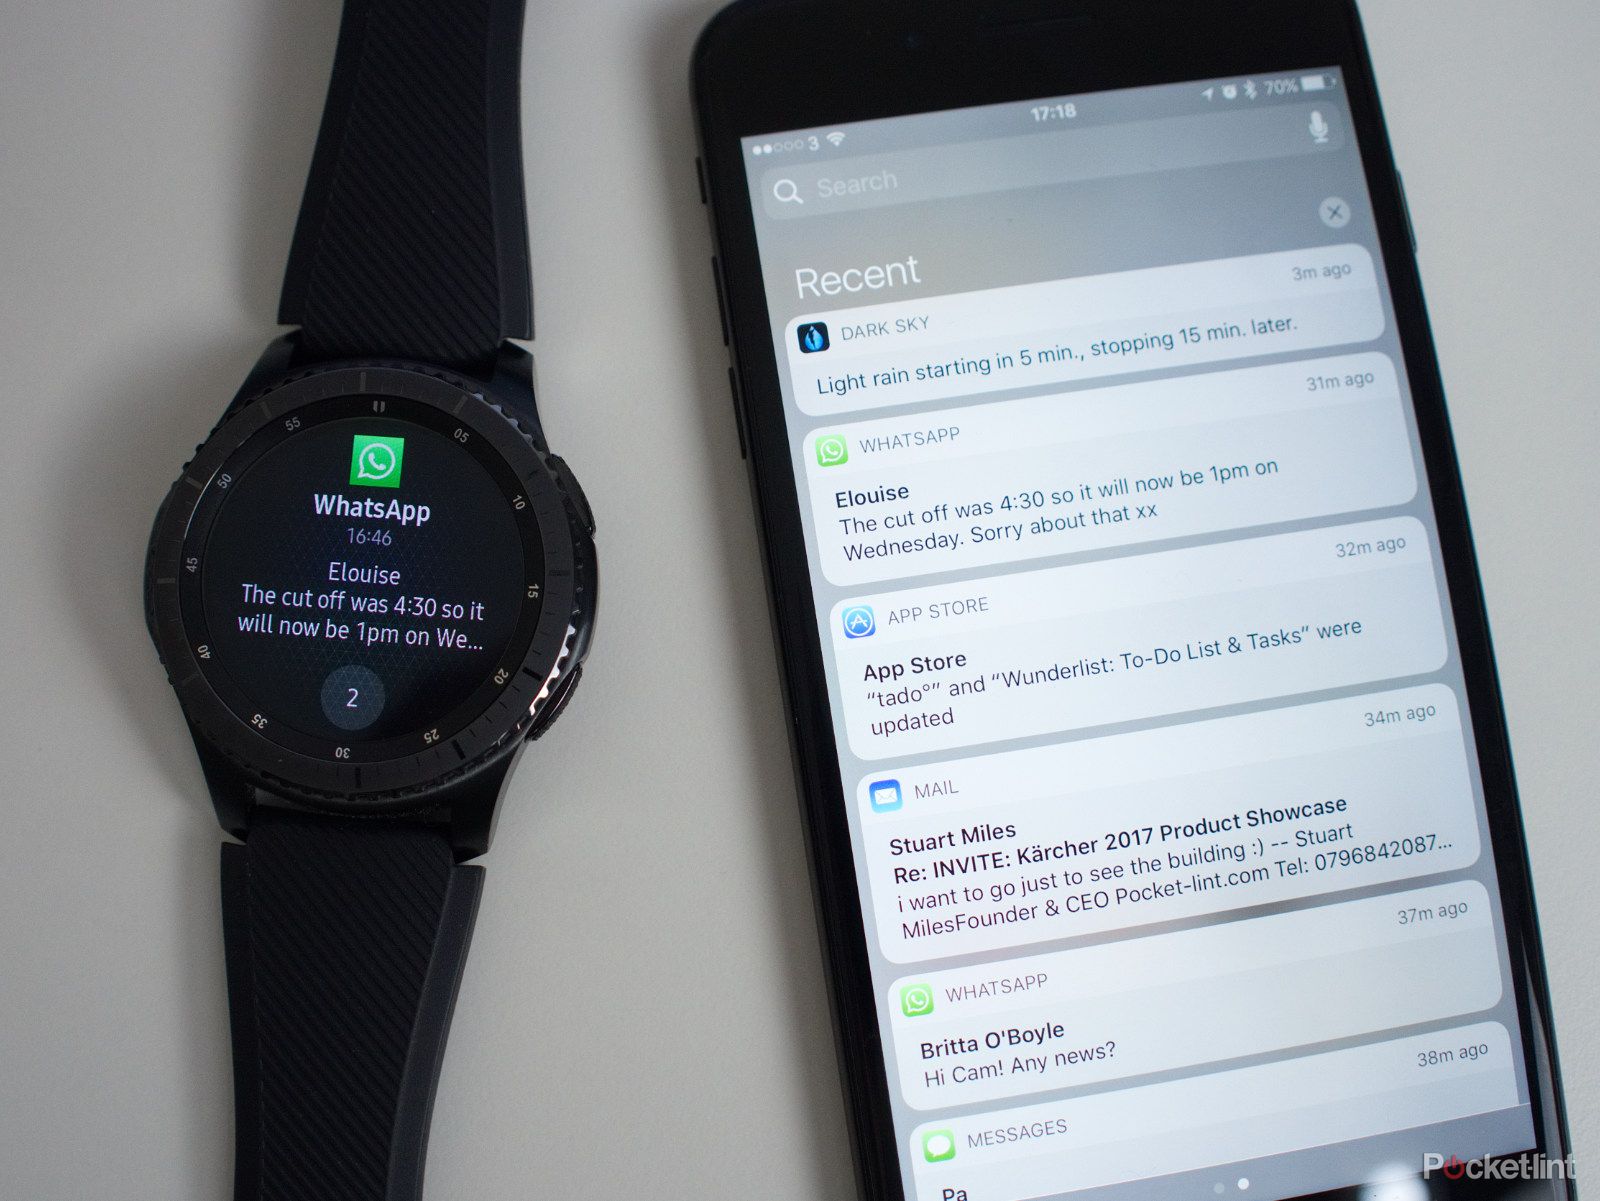 samsung gear s3 and gear s2 now connect to iphone here s how it works image 3